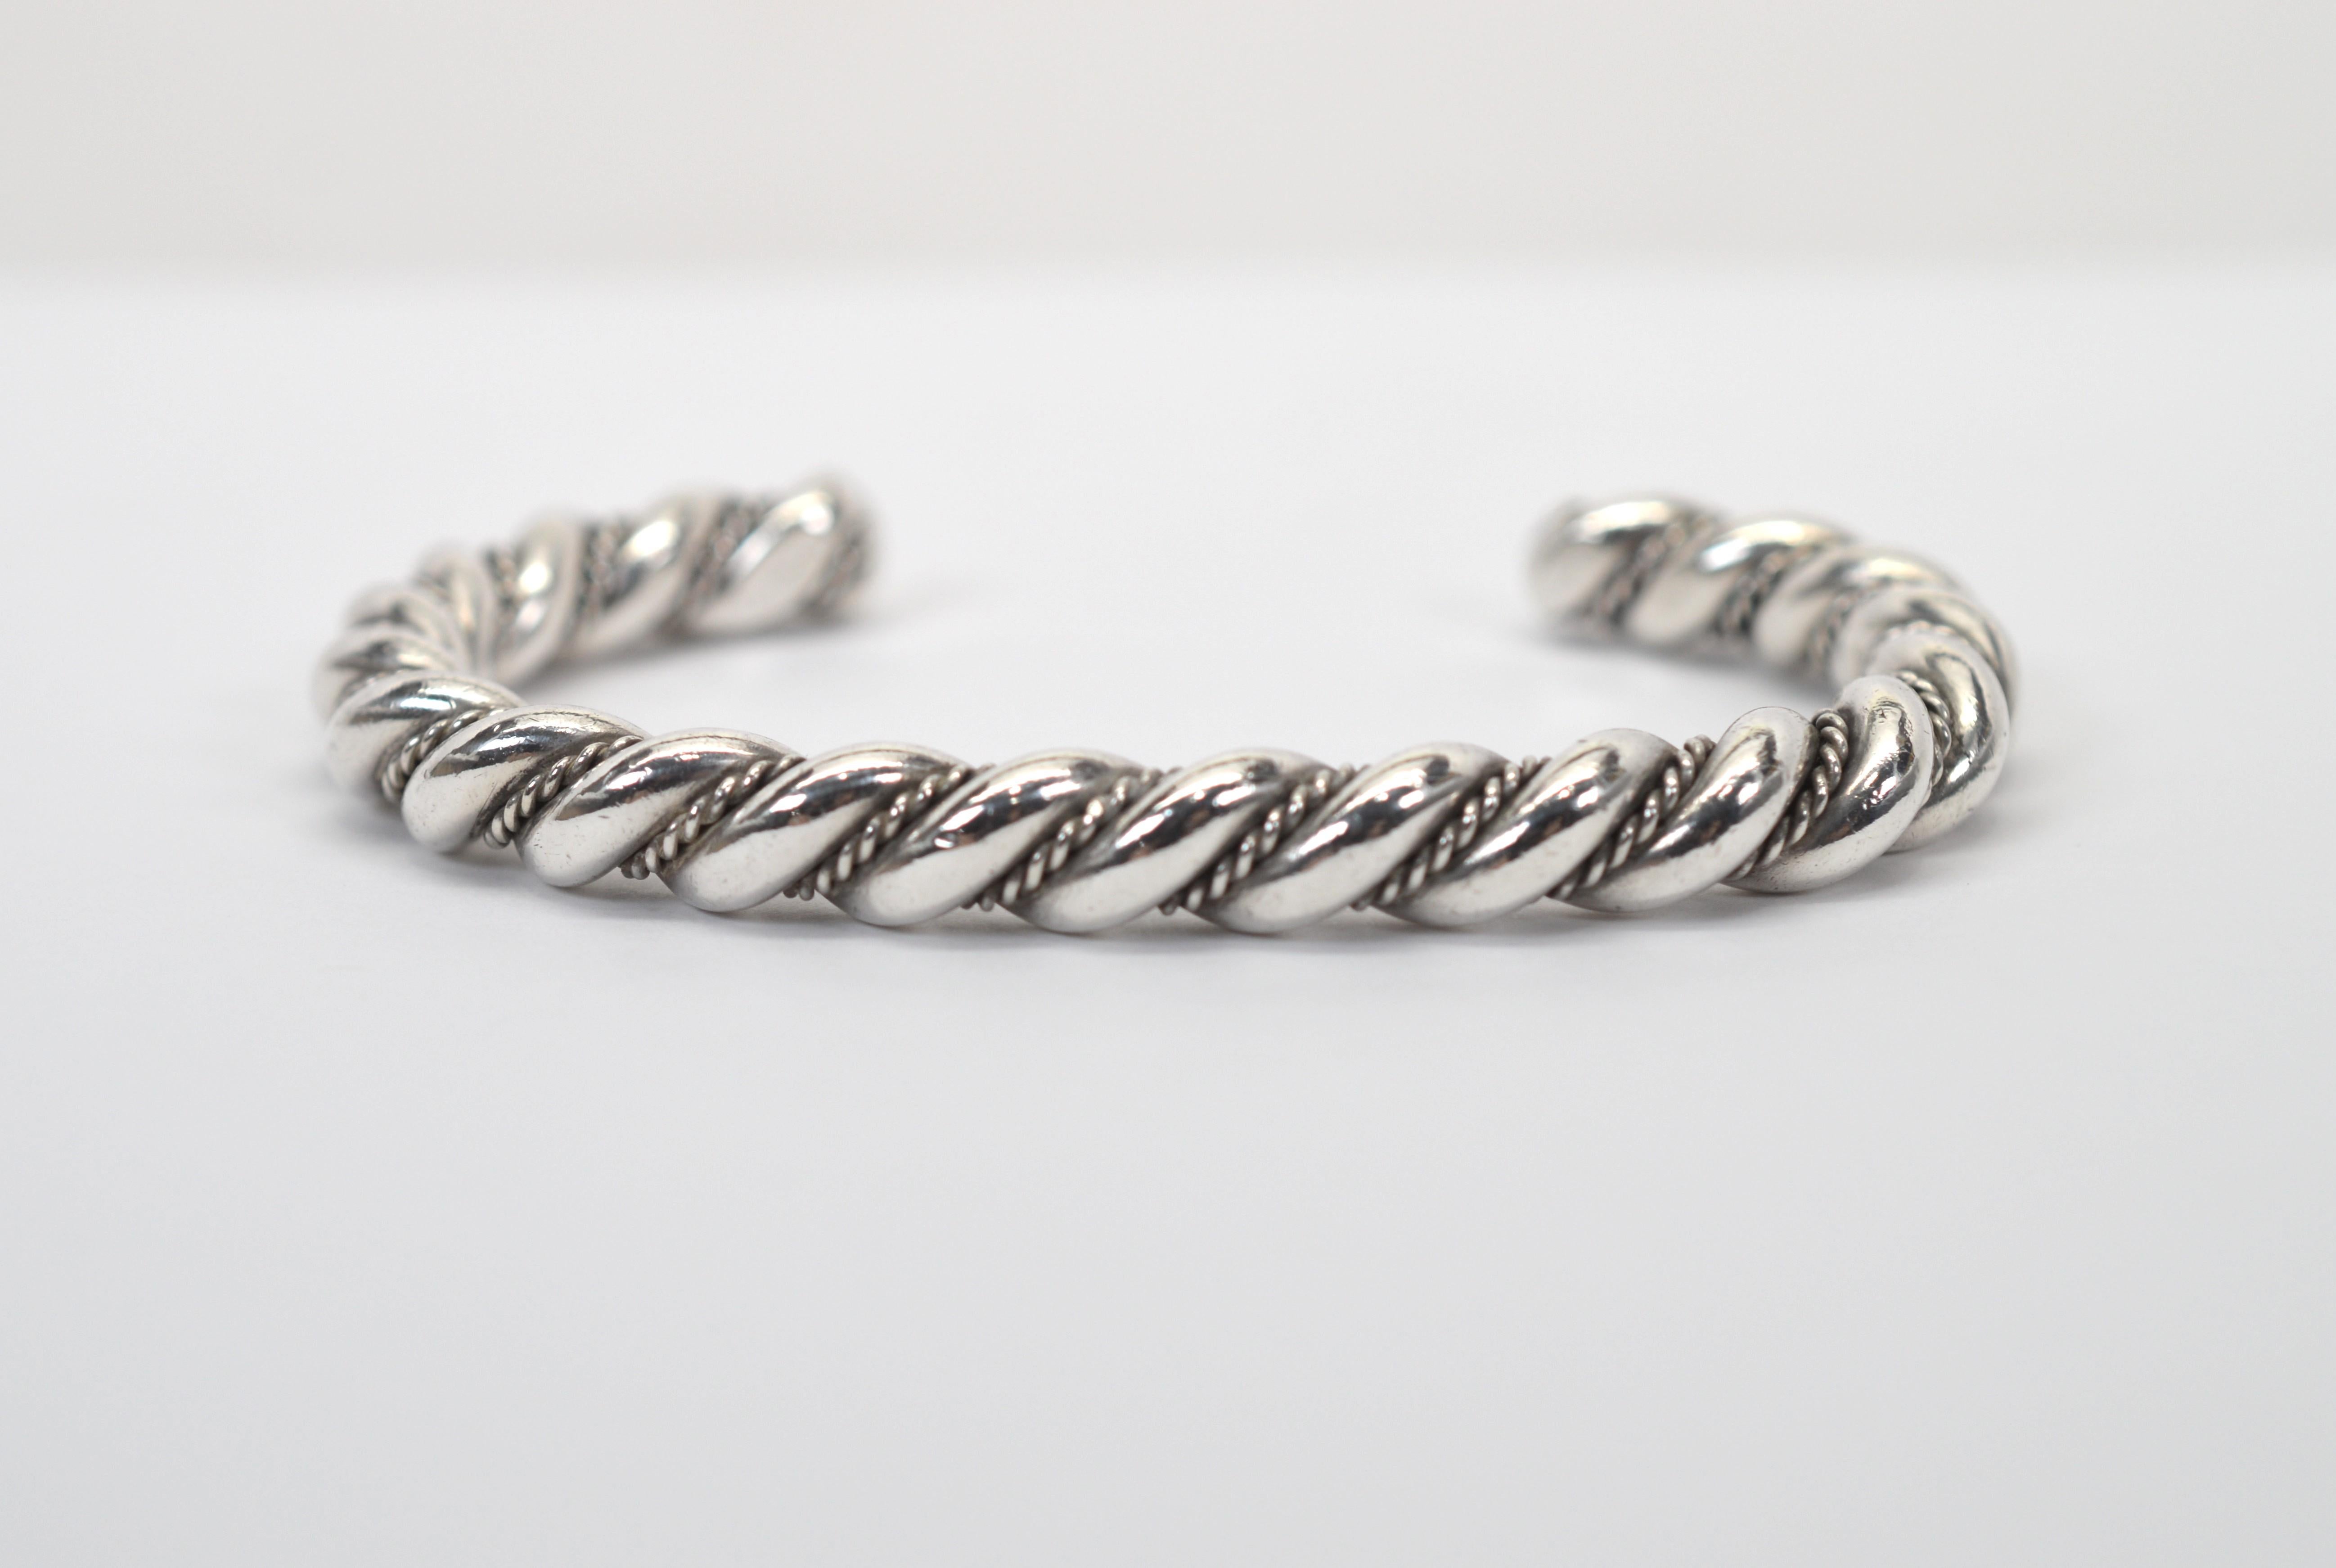 Crafted in heavy 64mm gauge .925 sterling silver, this unisex cuff bracelet measures a generous 3-1/4 inch.  Enhanced with an integrated bead rope detail, this finely made artisan piece has a 1-3/8 inch opening to easily apply to the wrist. To